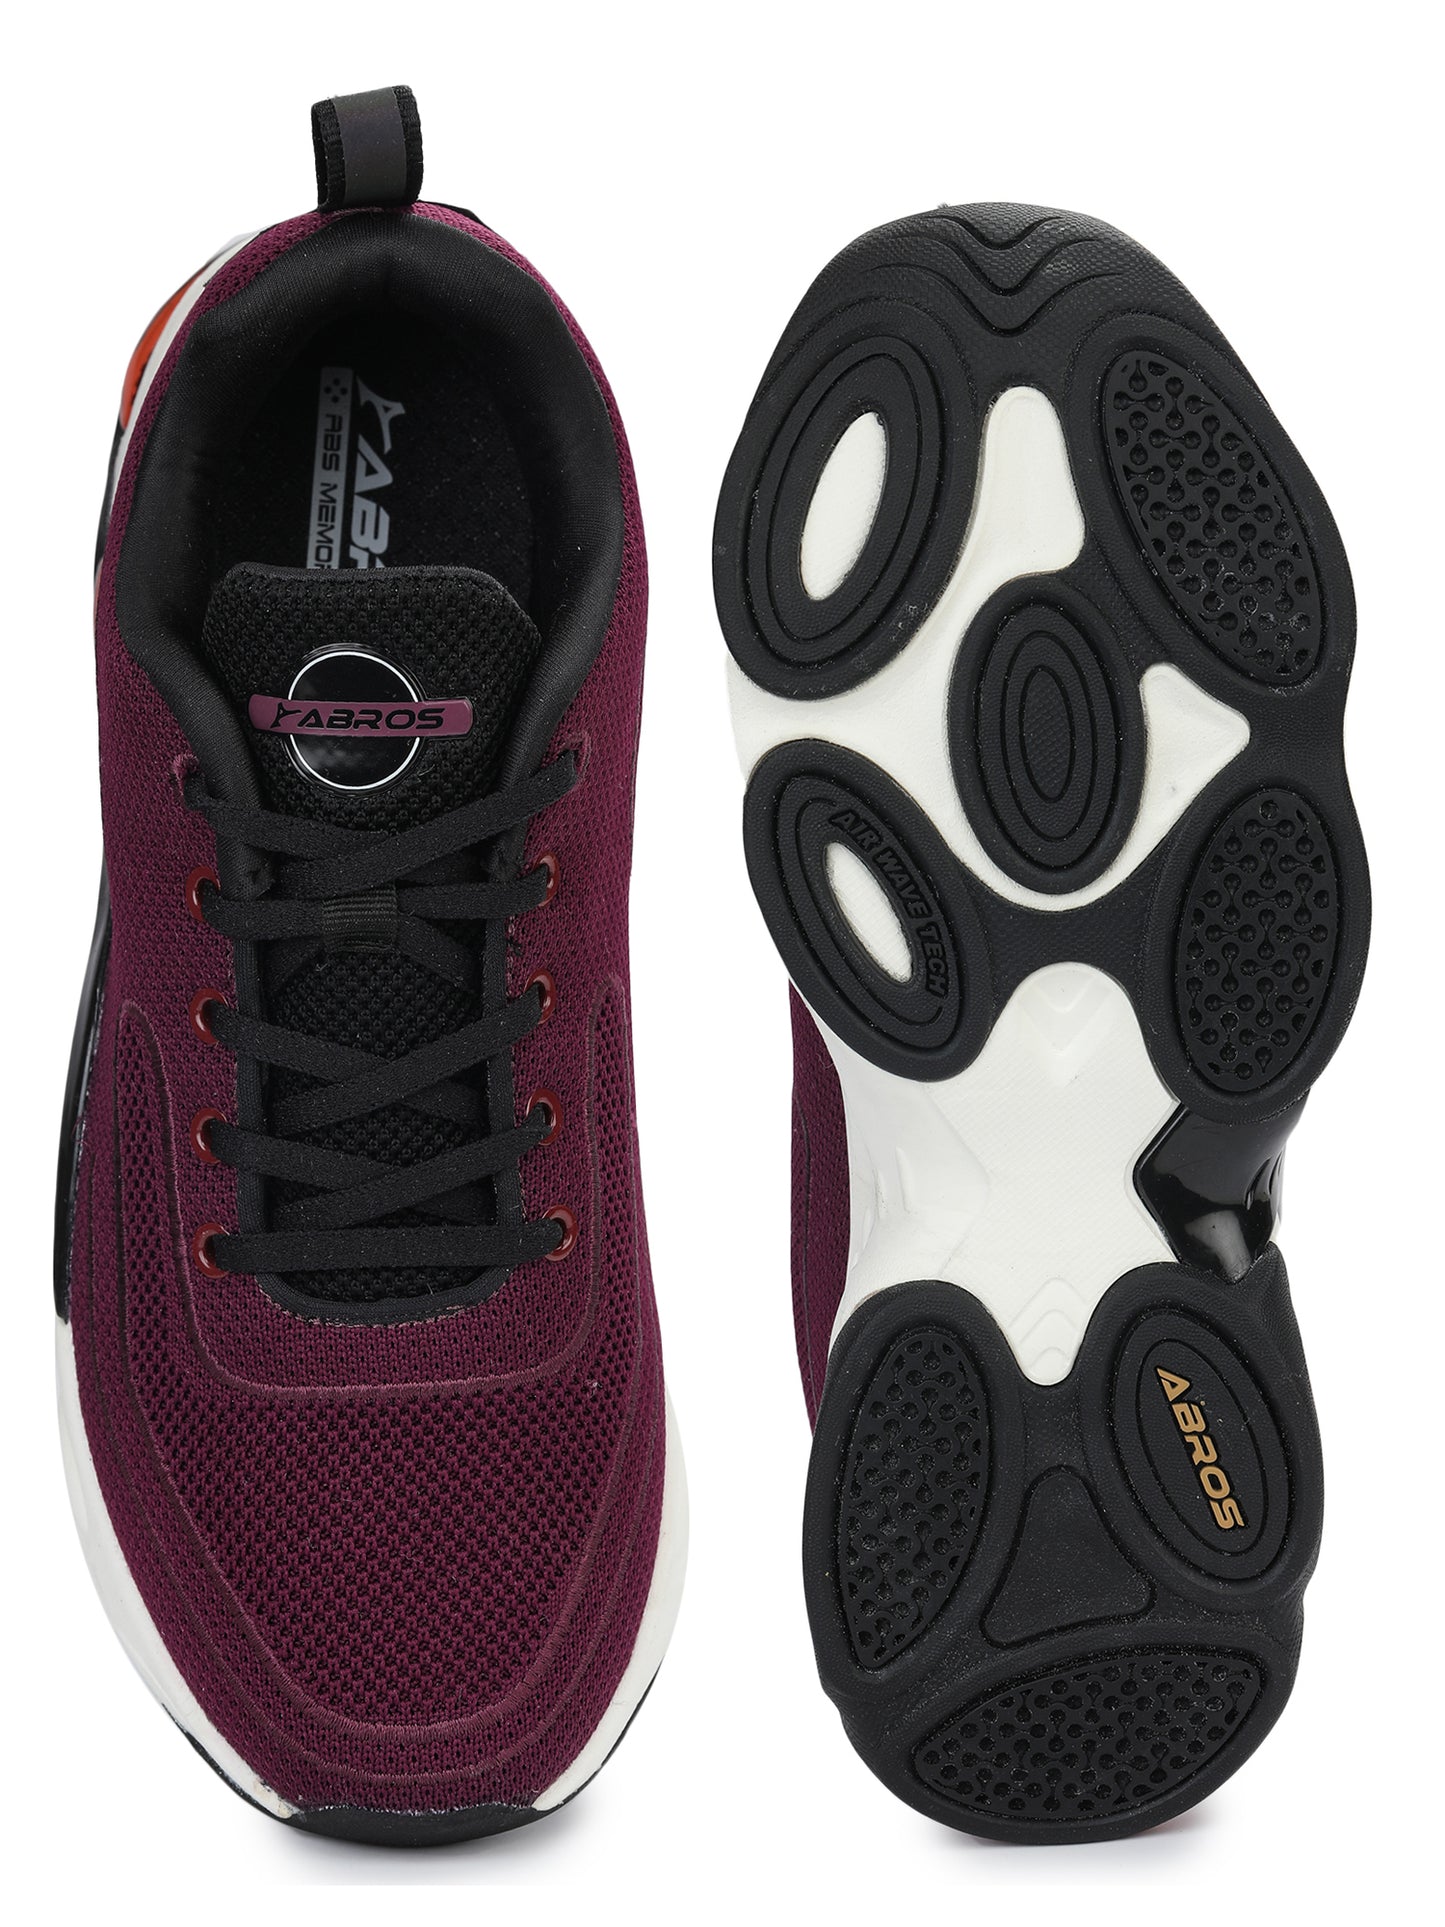 ABROS VOLVO SPORTS SHOES FOR MEN